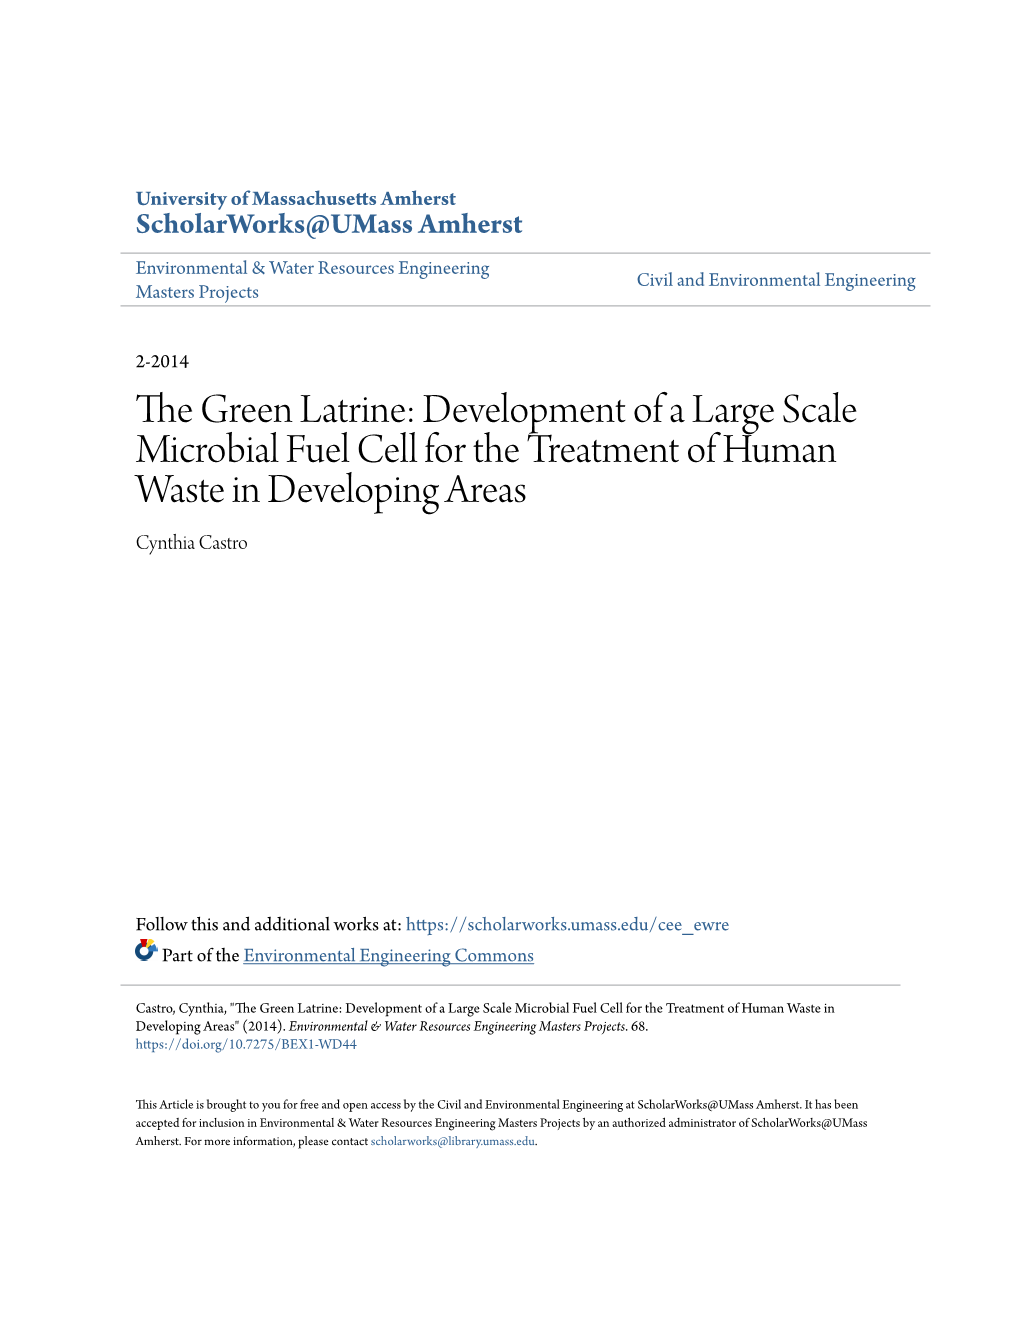 The Green Latrine: Development of a Large Scale Microbial Fuel Cell for the Treatment of Human Waste in Developing Areas Cynthia Castro